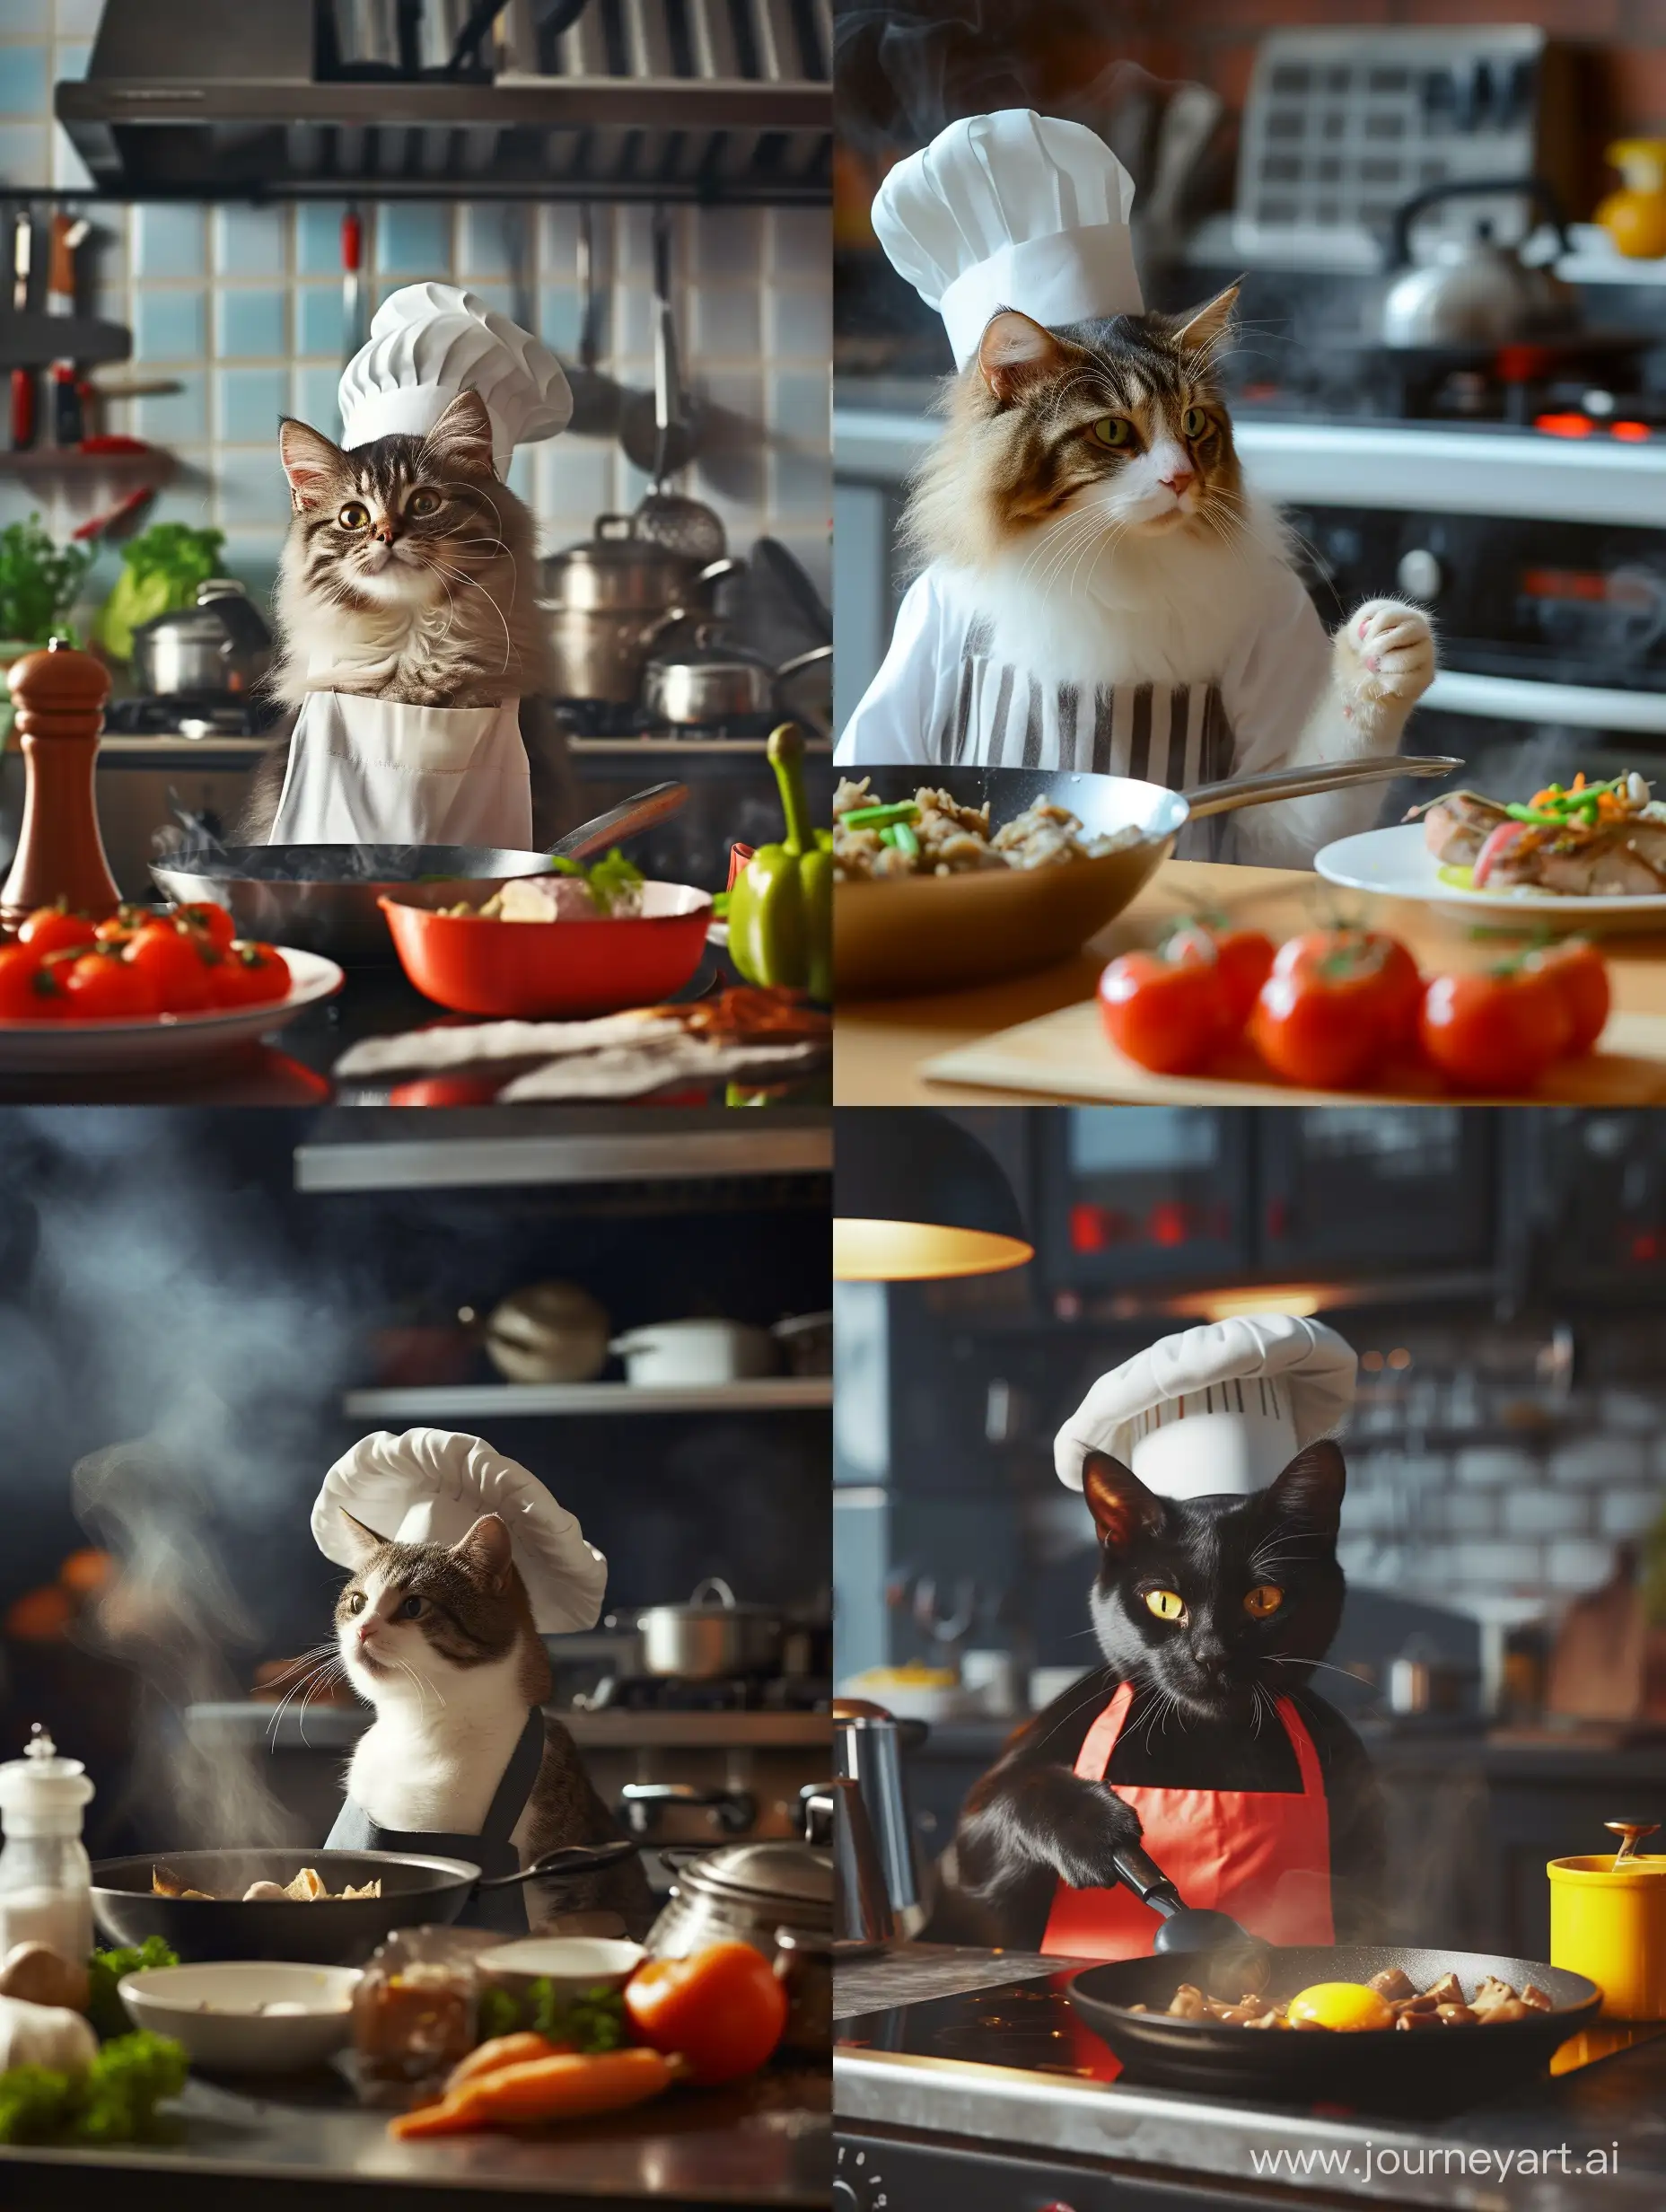 Gourmet-Cat-Chef-Creates-Culinary-Magic-in-WellEquipped-Kitchen